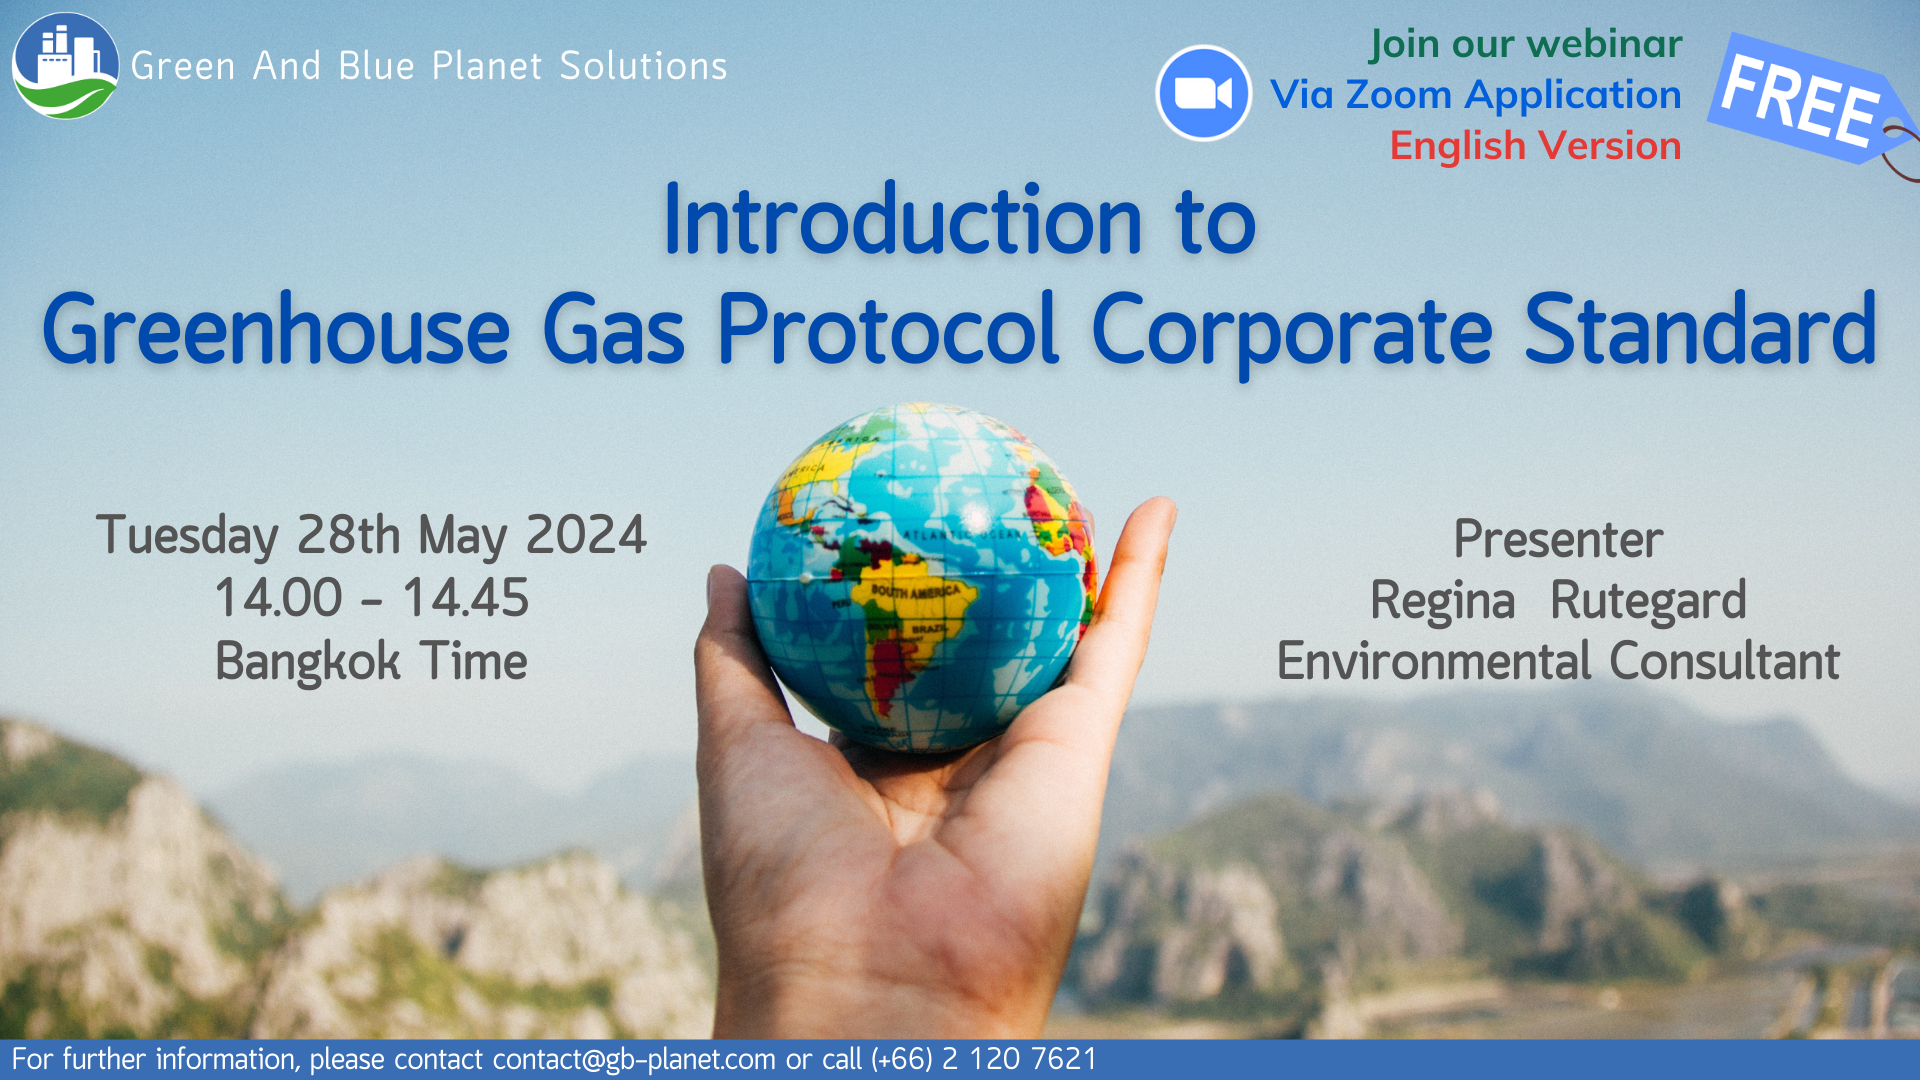 Webinar “Introduction to Greenhouse Gas Protocol Corporate Standard”